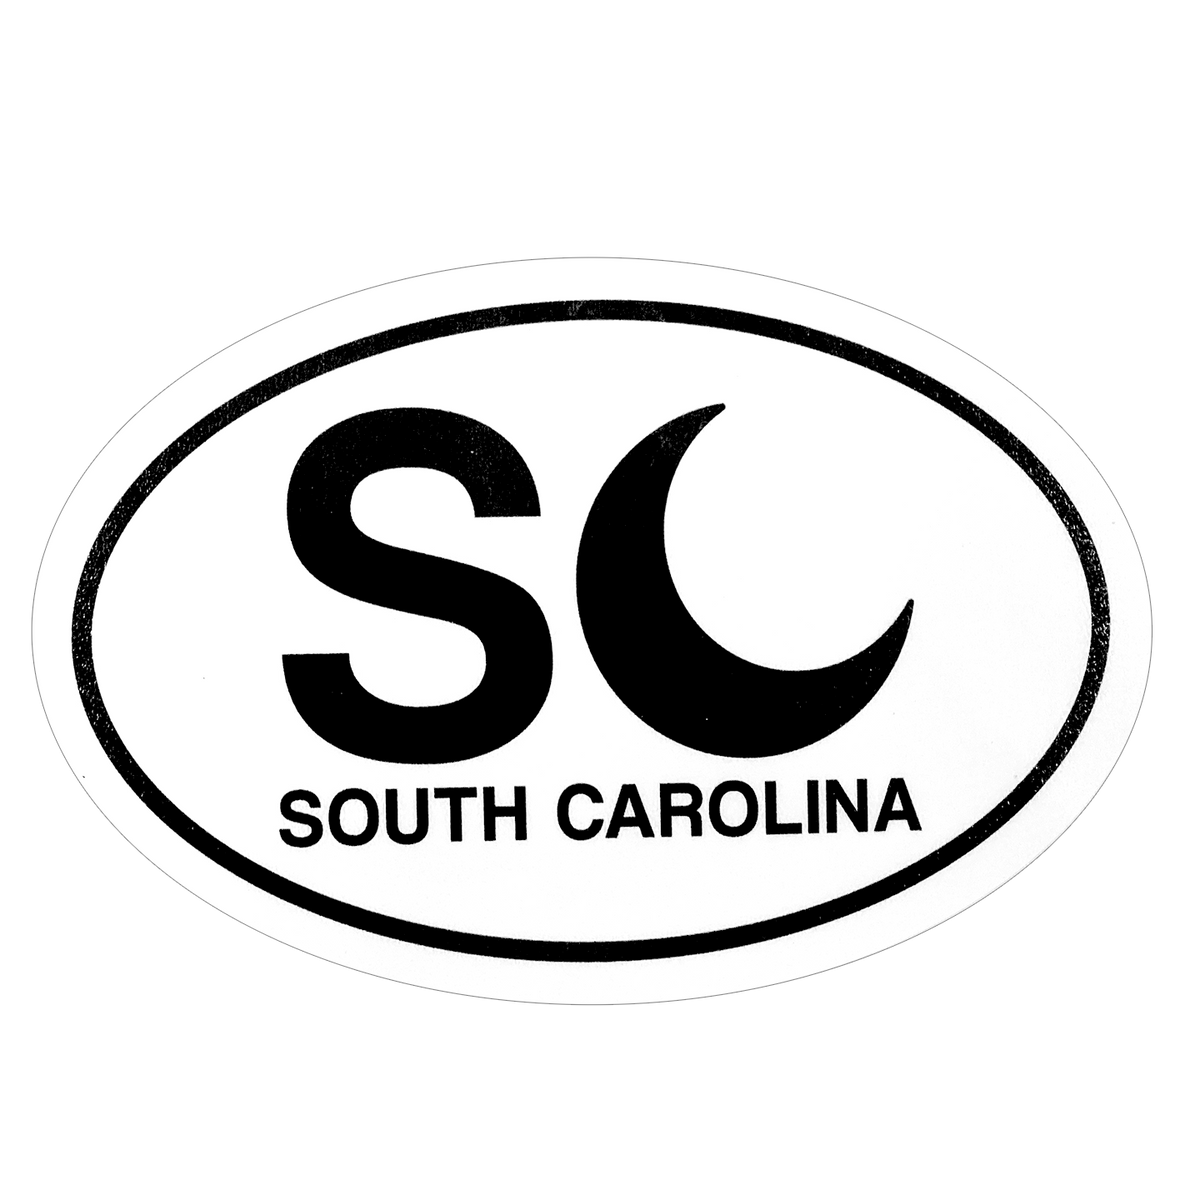 Oval SC Decal